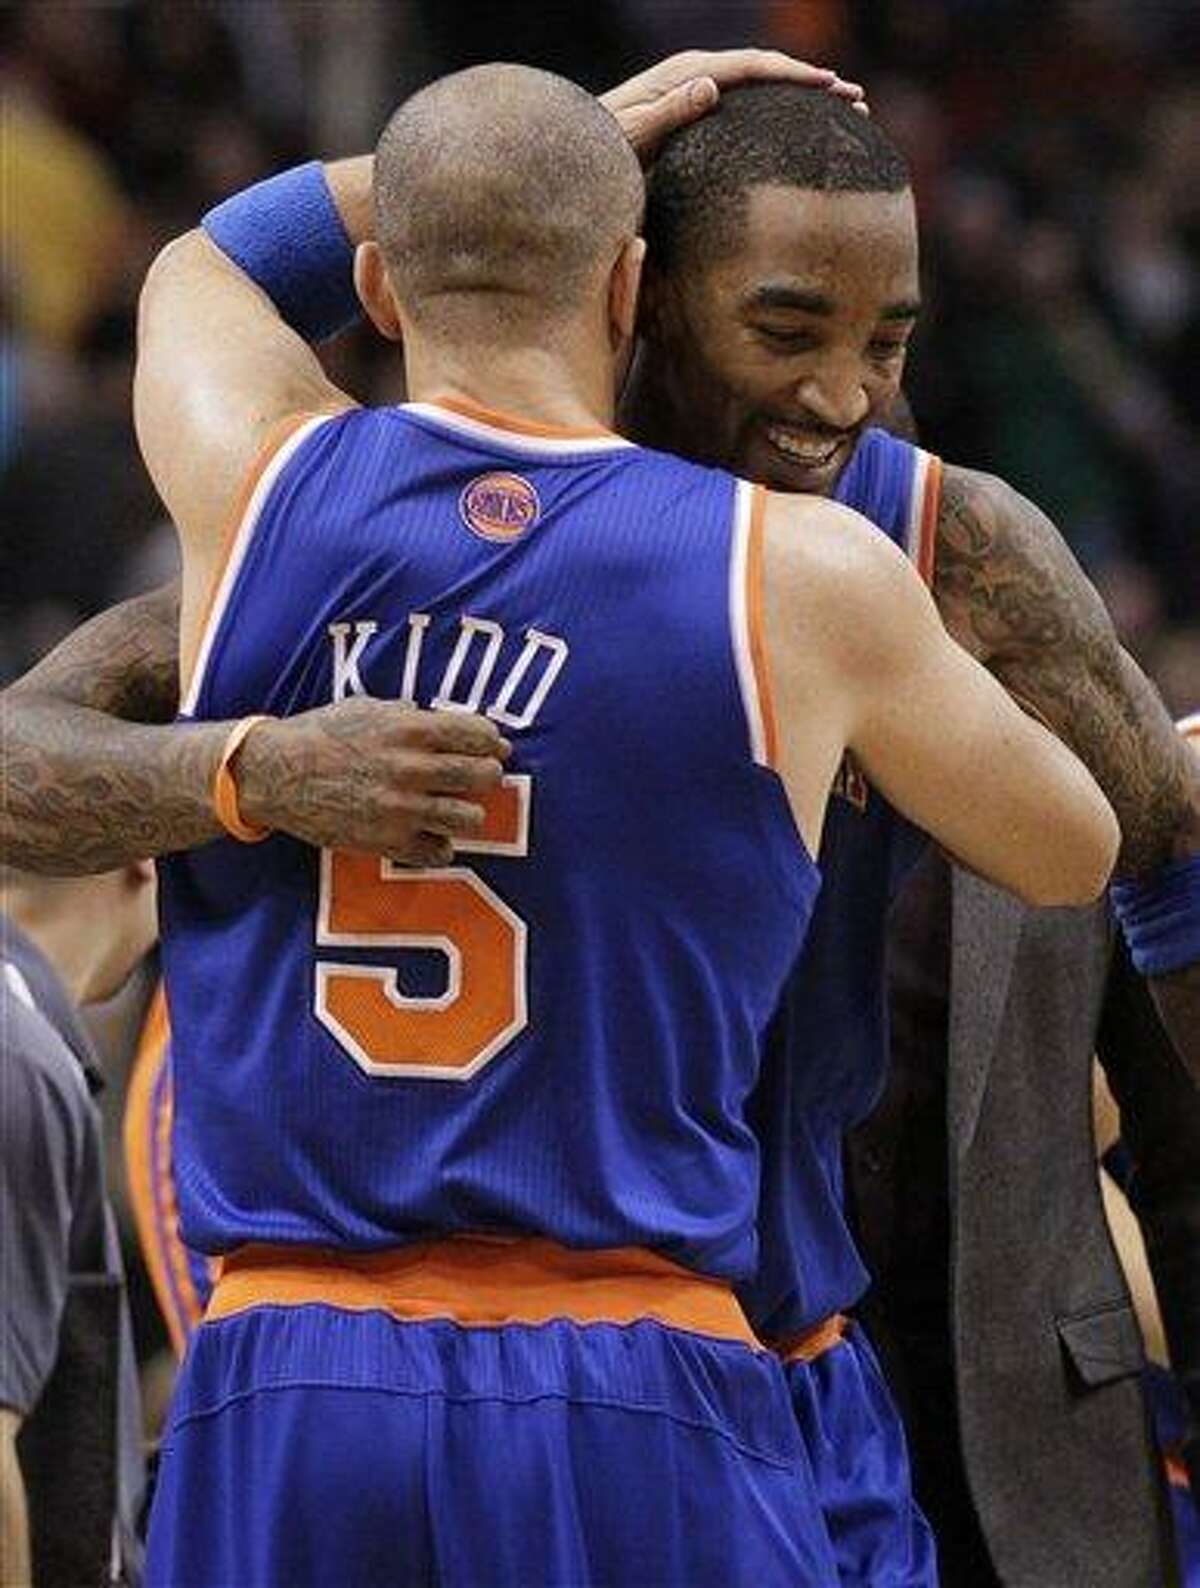 New York Knicks' Jason Kidd (5) celebrates with teammate J.R. Smith after Smith hit a game-winning basket against the Phoenix Suns during the second half of an NBA basketball game on Wednesday, Dec. 26, 2012, in Phoenix. The Knicks won 99-97. (AP Photo/Matt York)